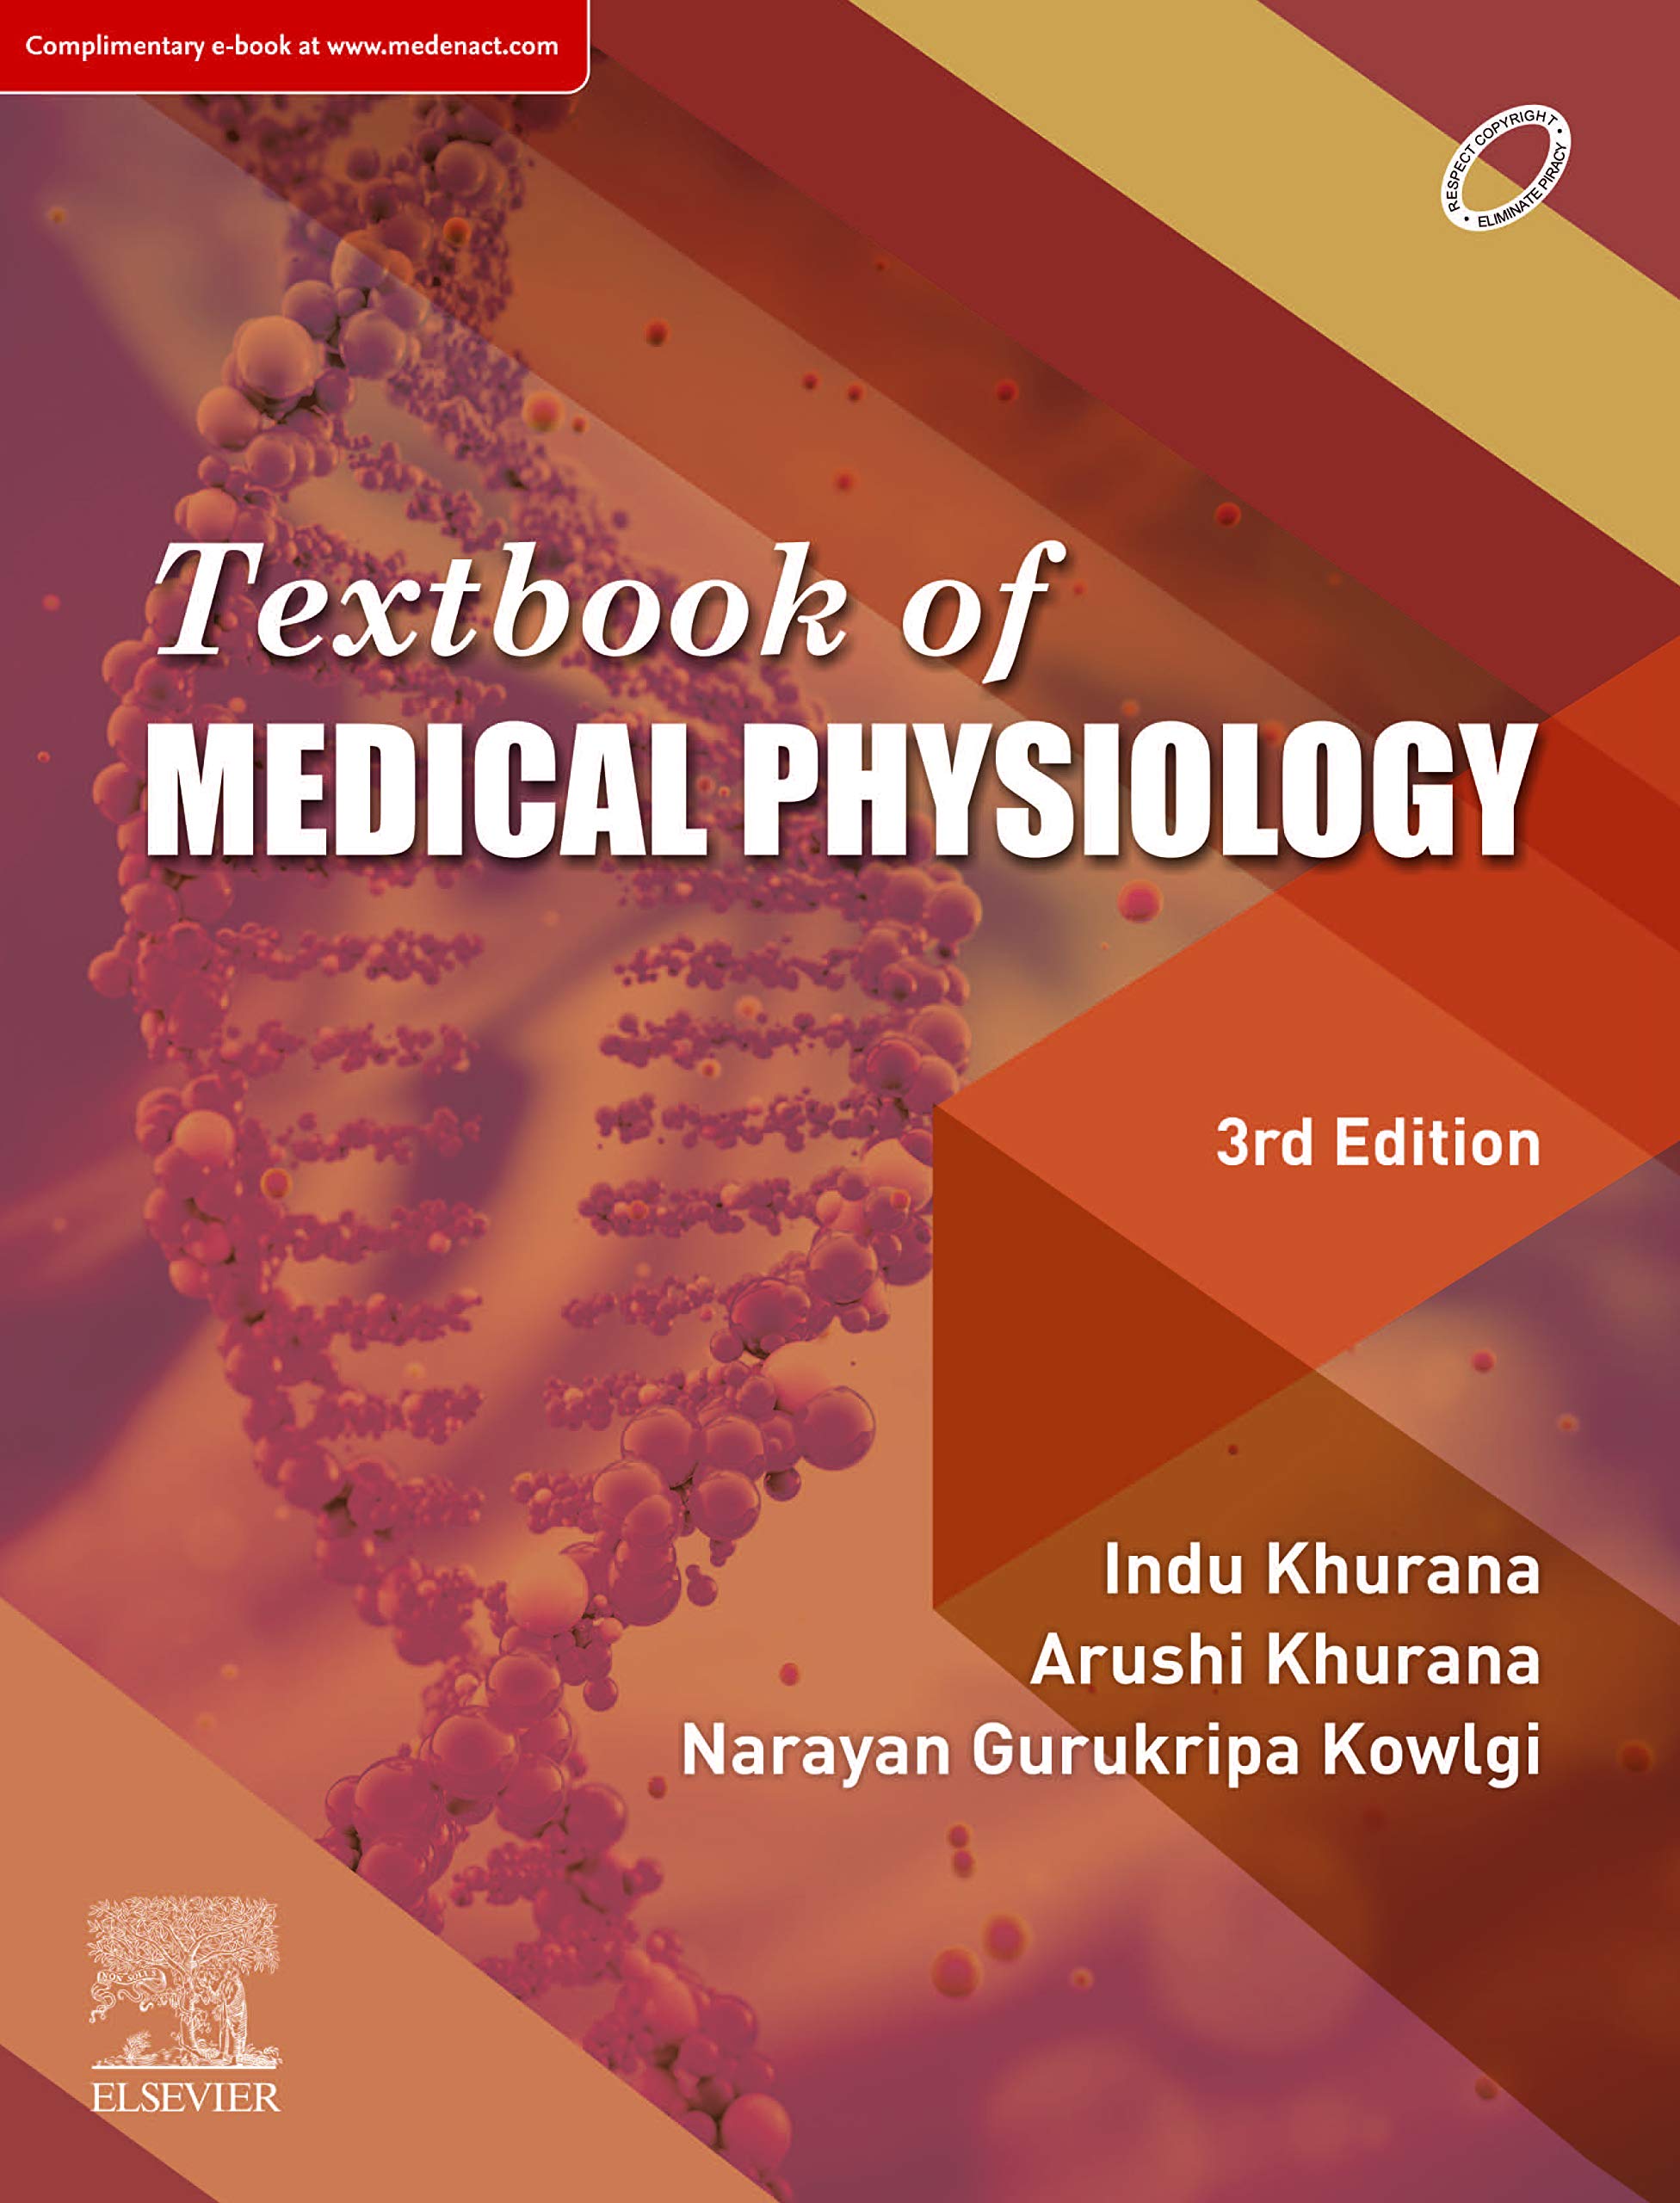 Textbook of Medical Physiology 3rd Edition 2020